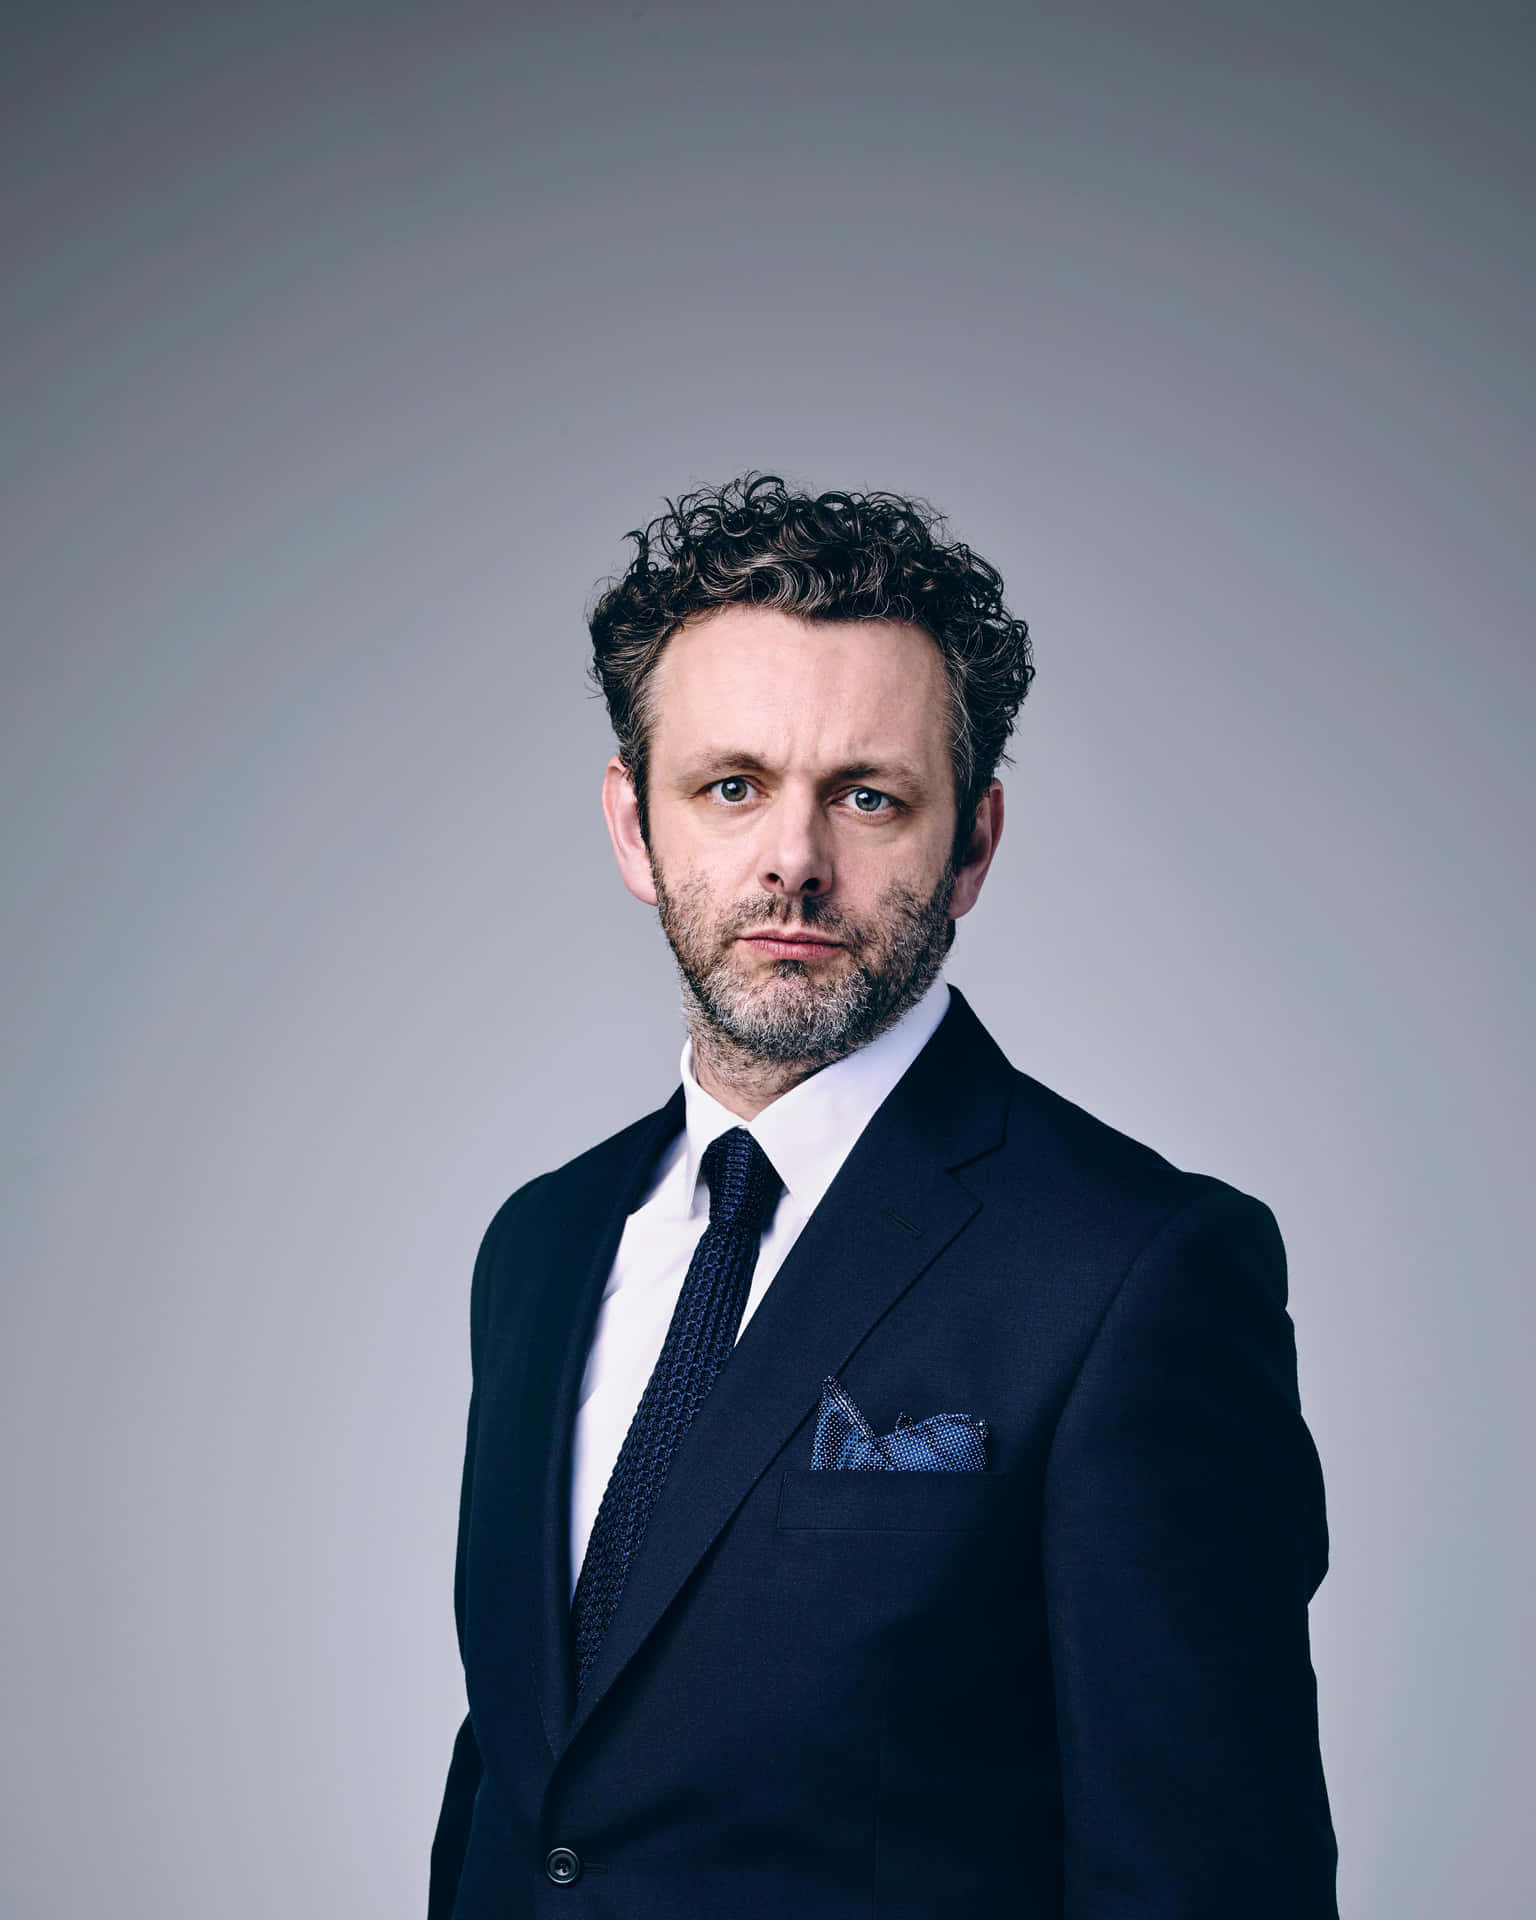 Michael Sheen at the Premiere of The Good Fight Wallpaper